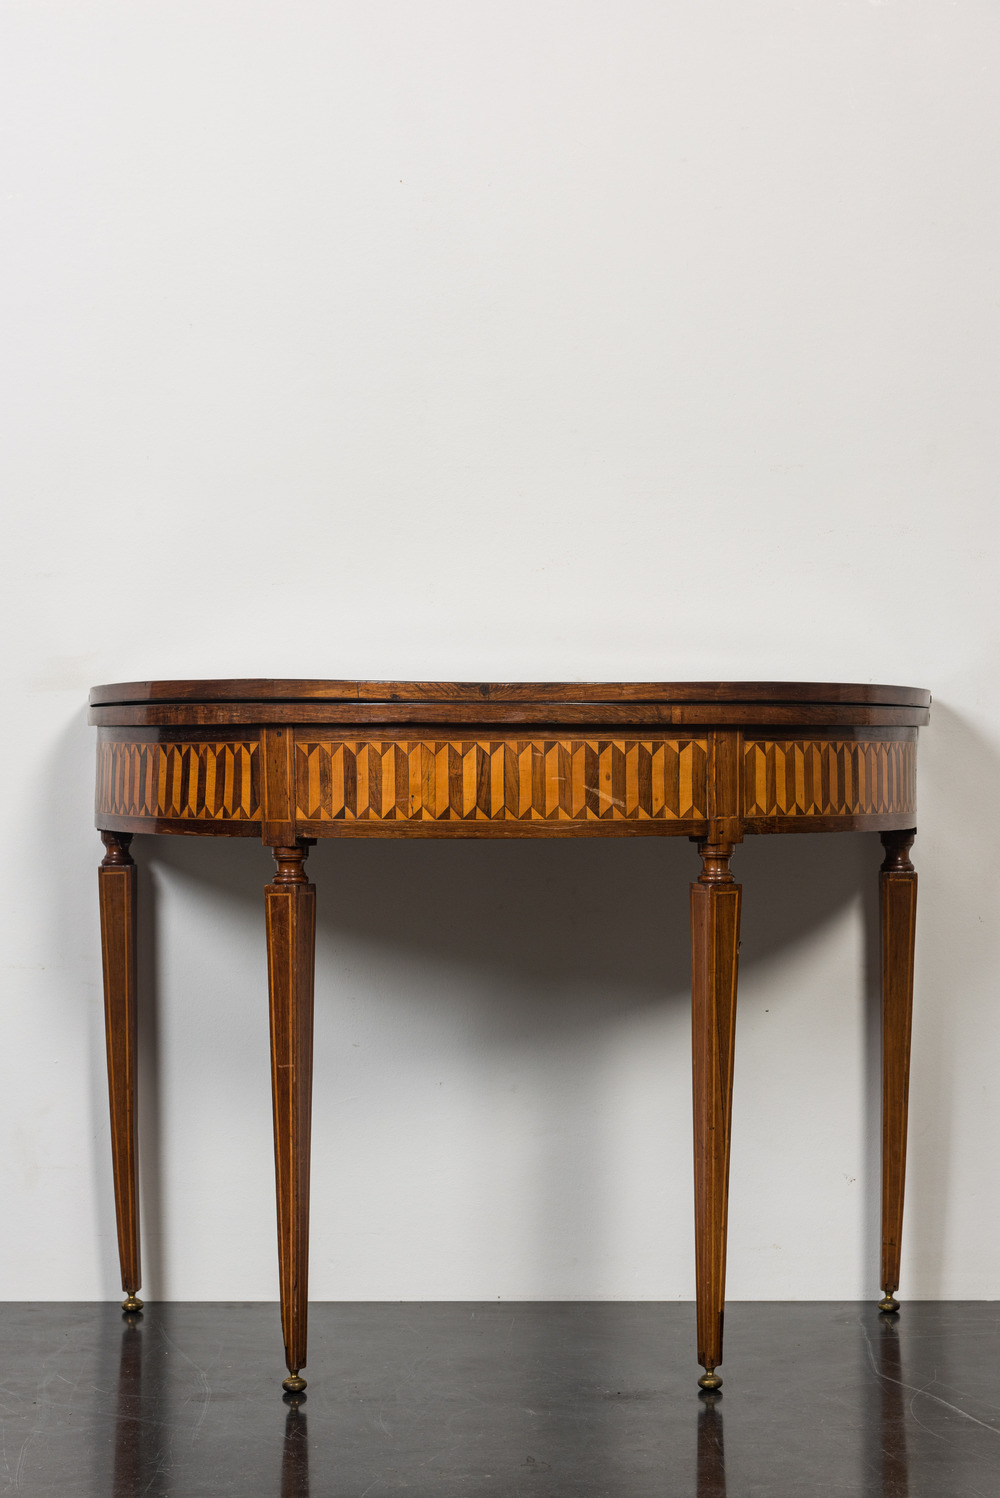 An Italian marquetry demi-lune gaming table with inlaid design of bow and arrows, 18/19th C.